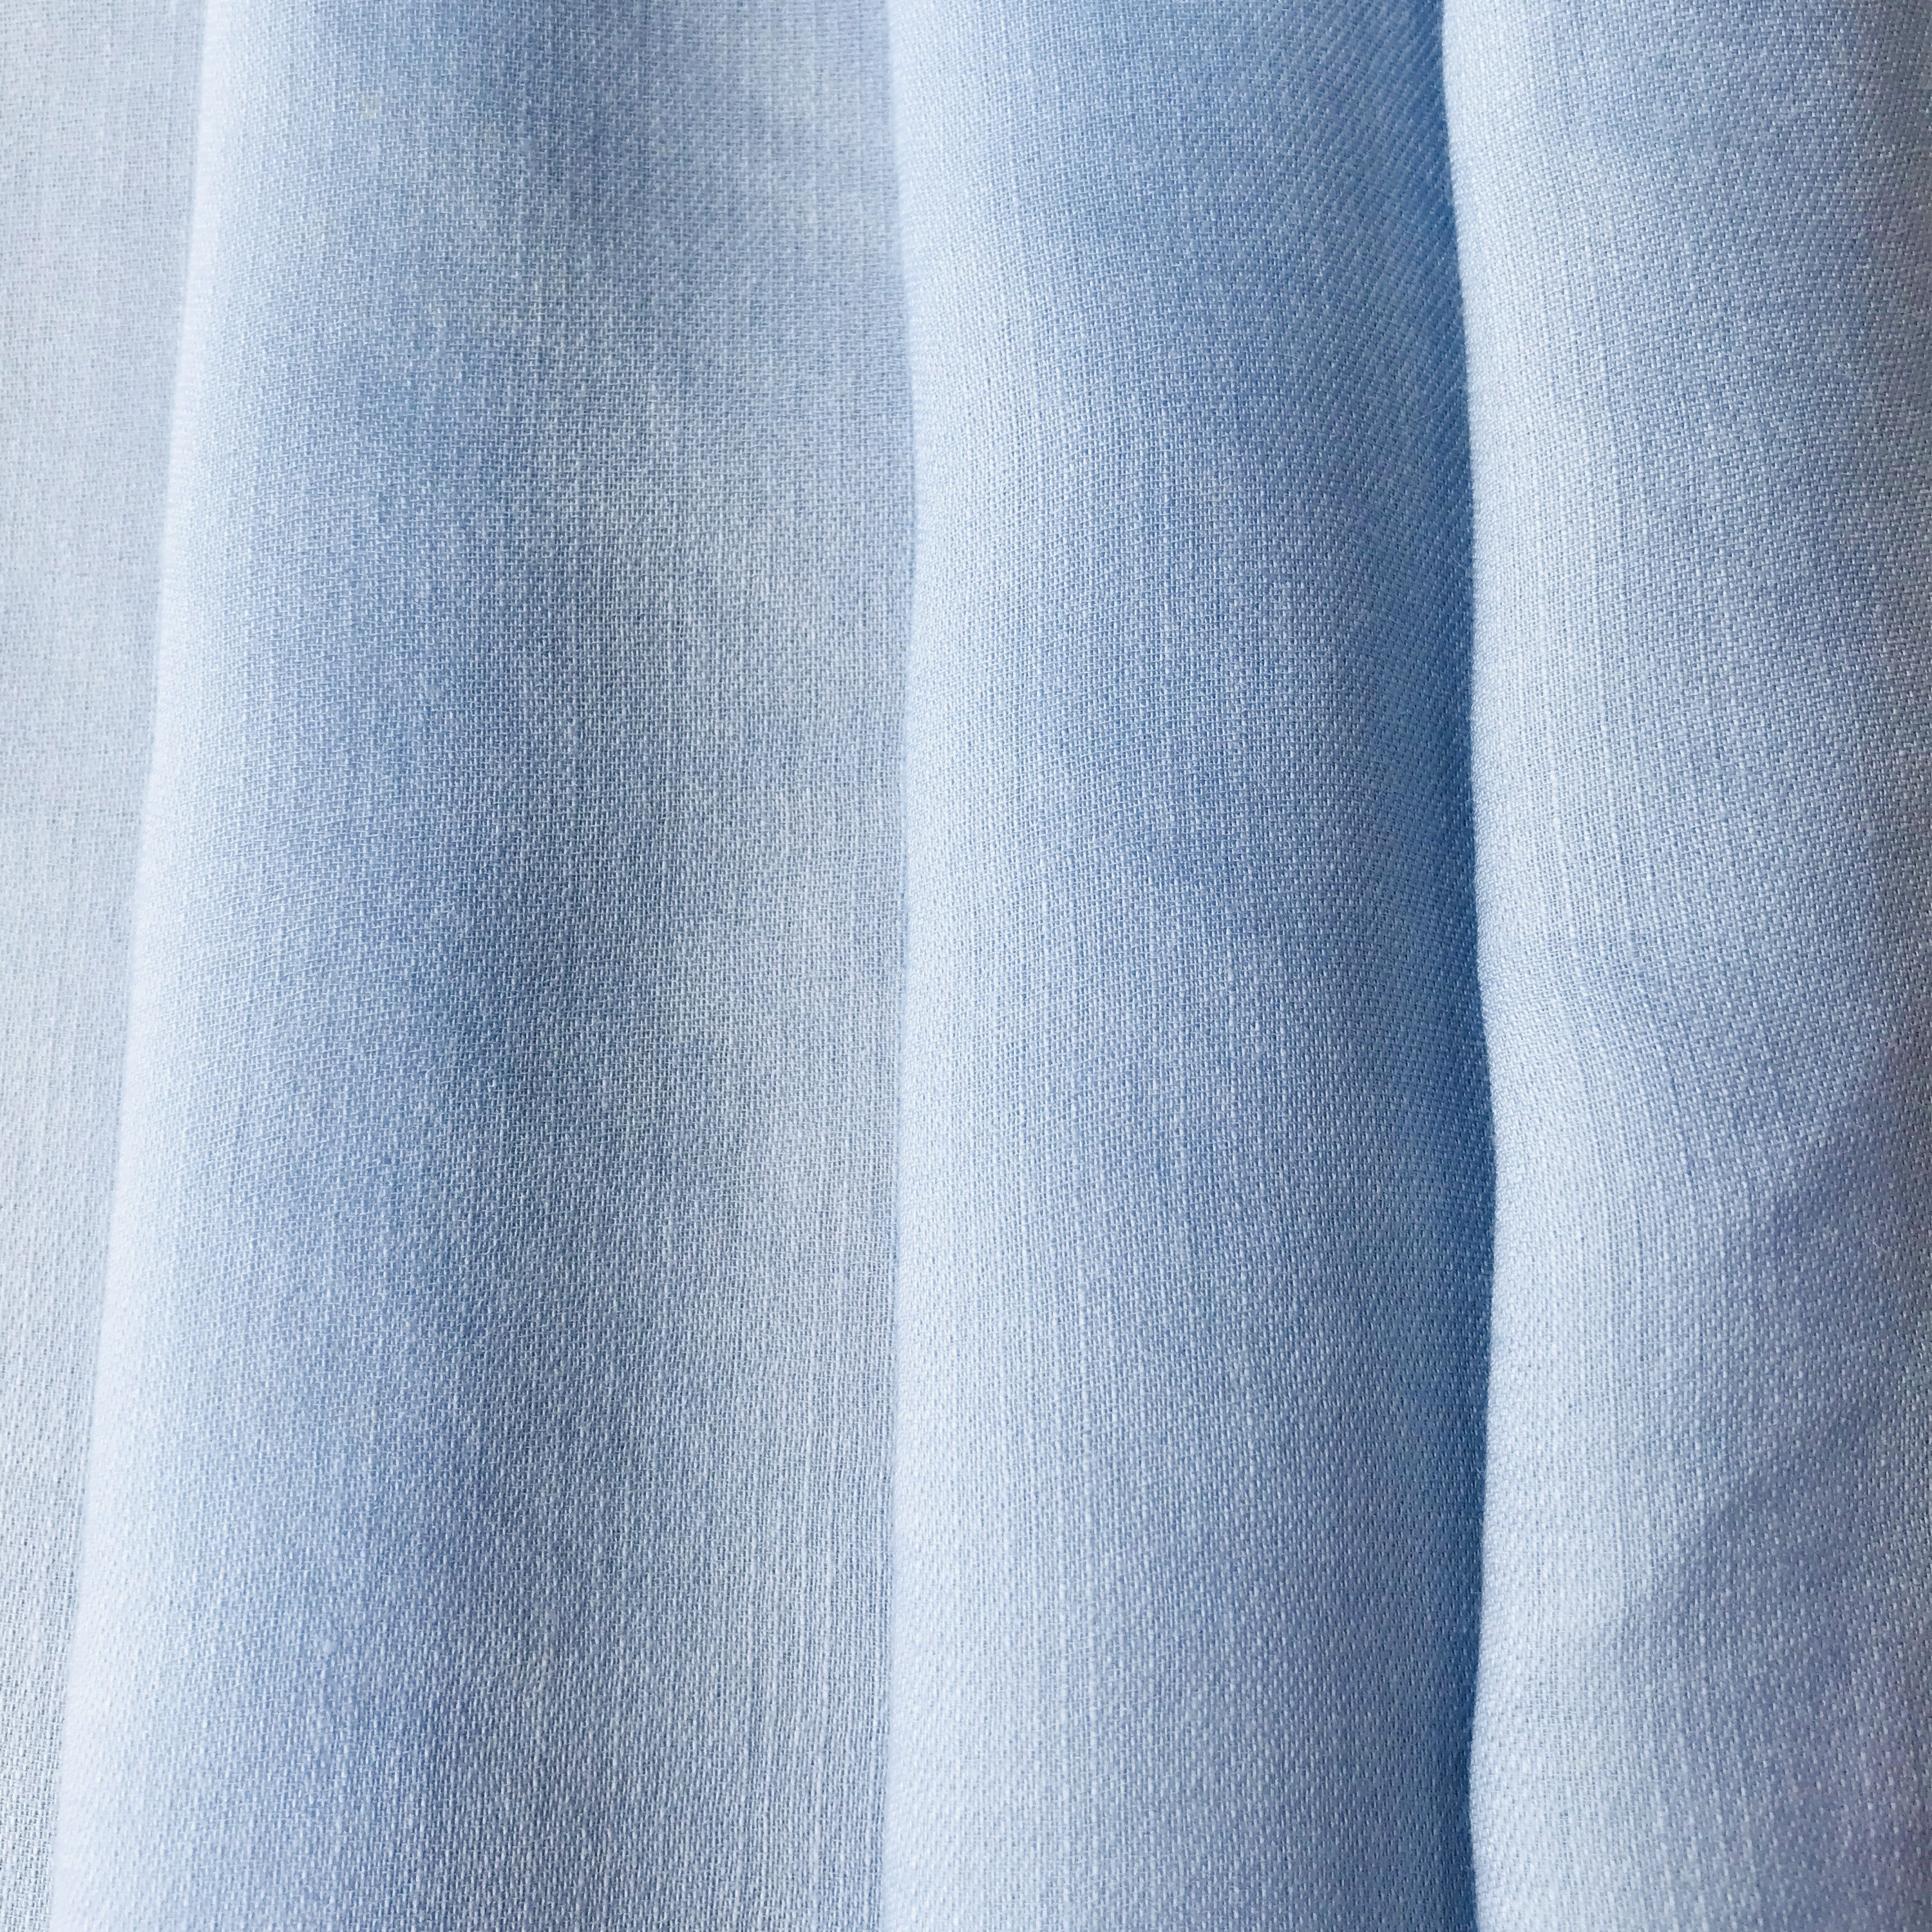 100% Polyester Fabric Blue (Remnant-55cmx165cm) Upholstery Fabric The Meter  Fabric Apparel Fabric Bridal Fabric